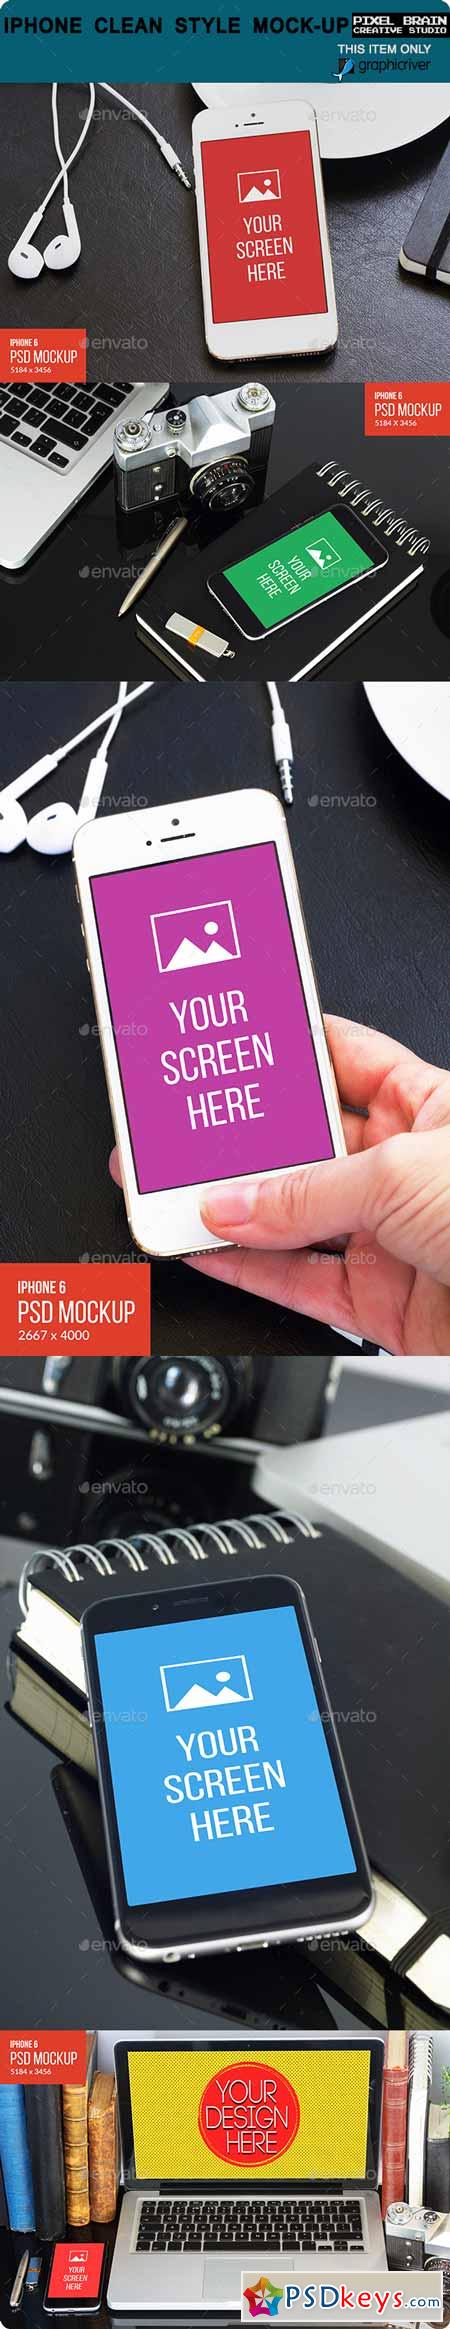 Iphone Clean Style Mock-Up 14377279